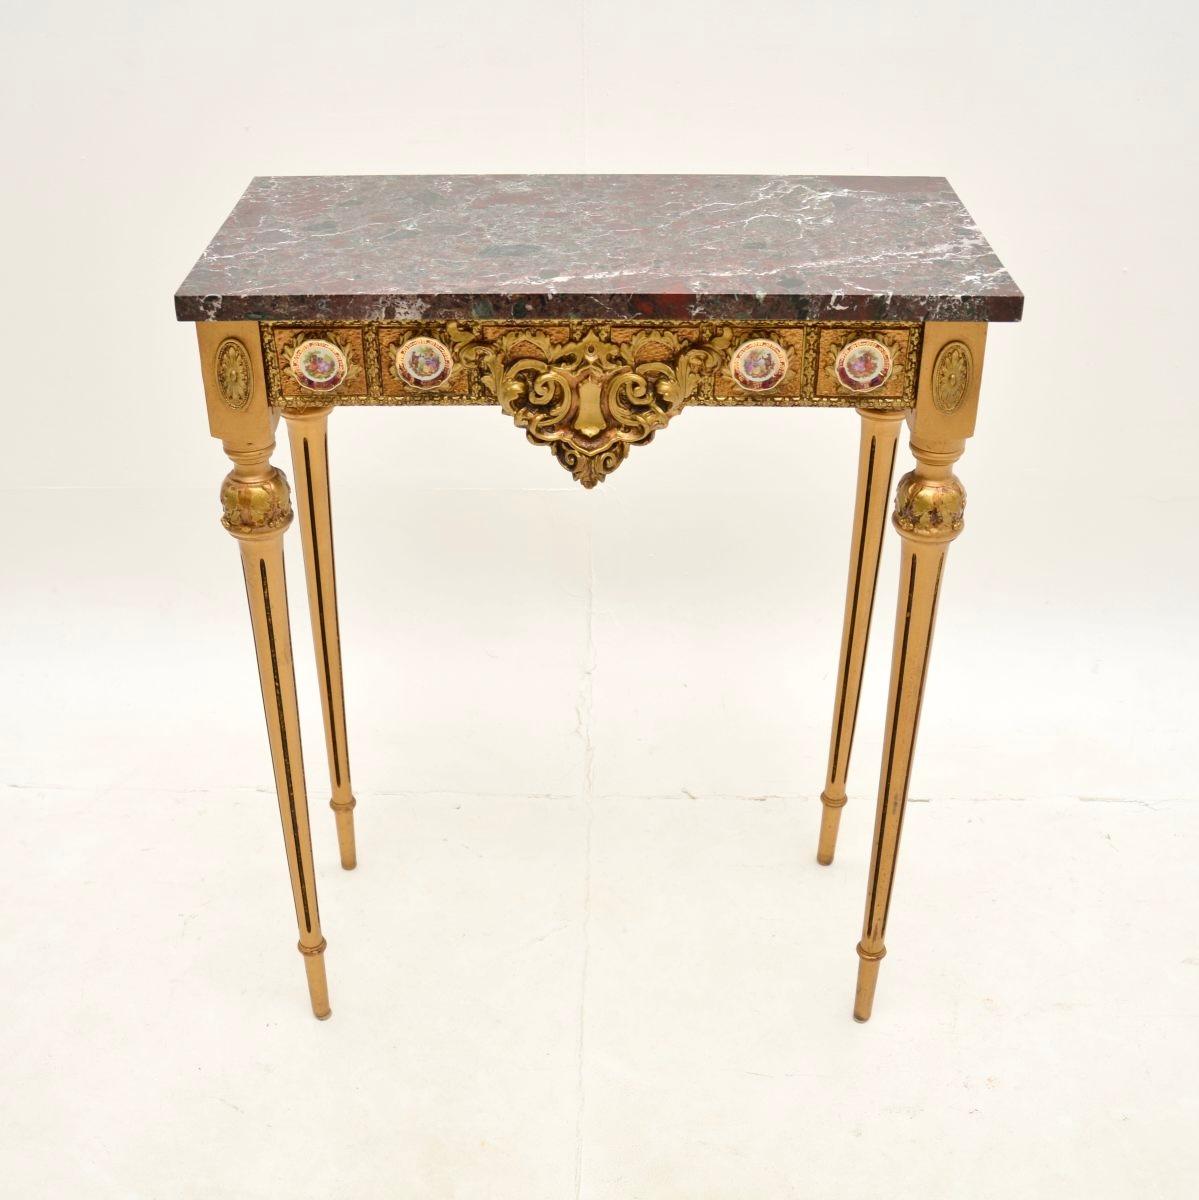 A beautiful antique French giltwood marble top console / side table. This was made in France, it dates from around the 1950’s.

The quality is superb, the wood is beautifully carved with intricate details. This has amazing porcelain Limoge hand